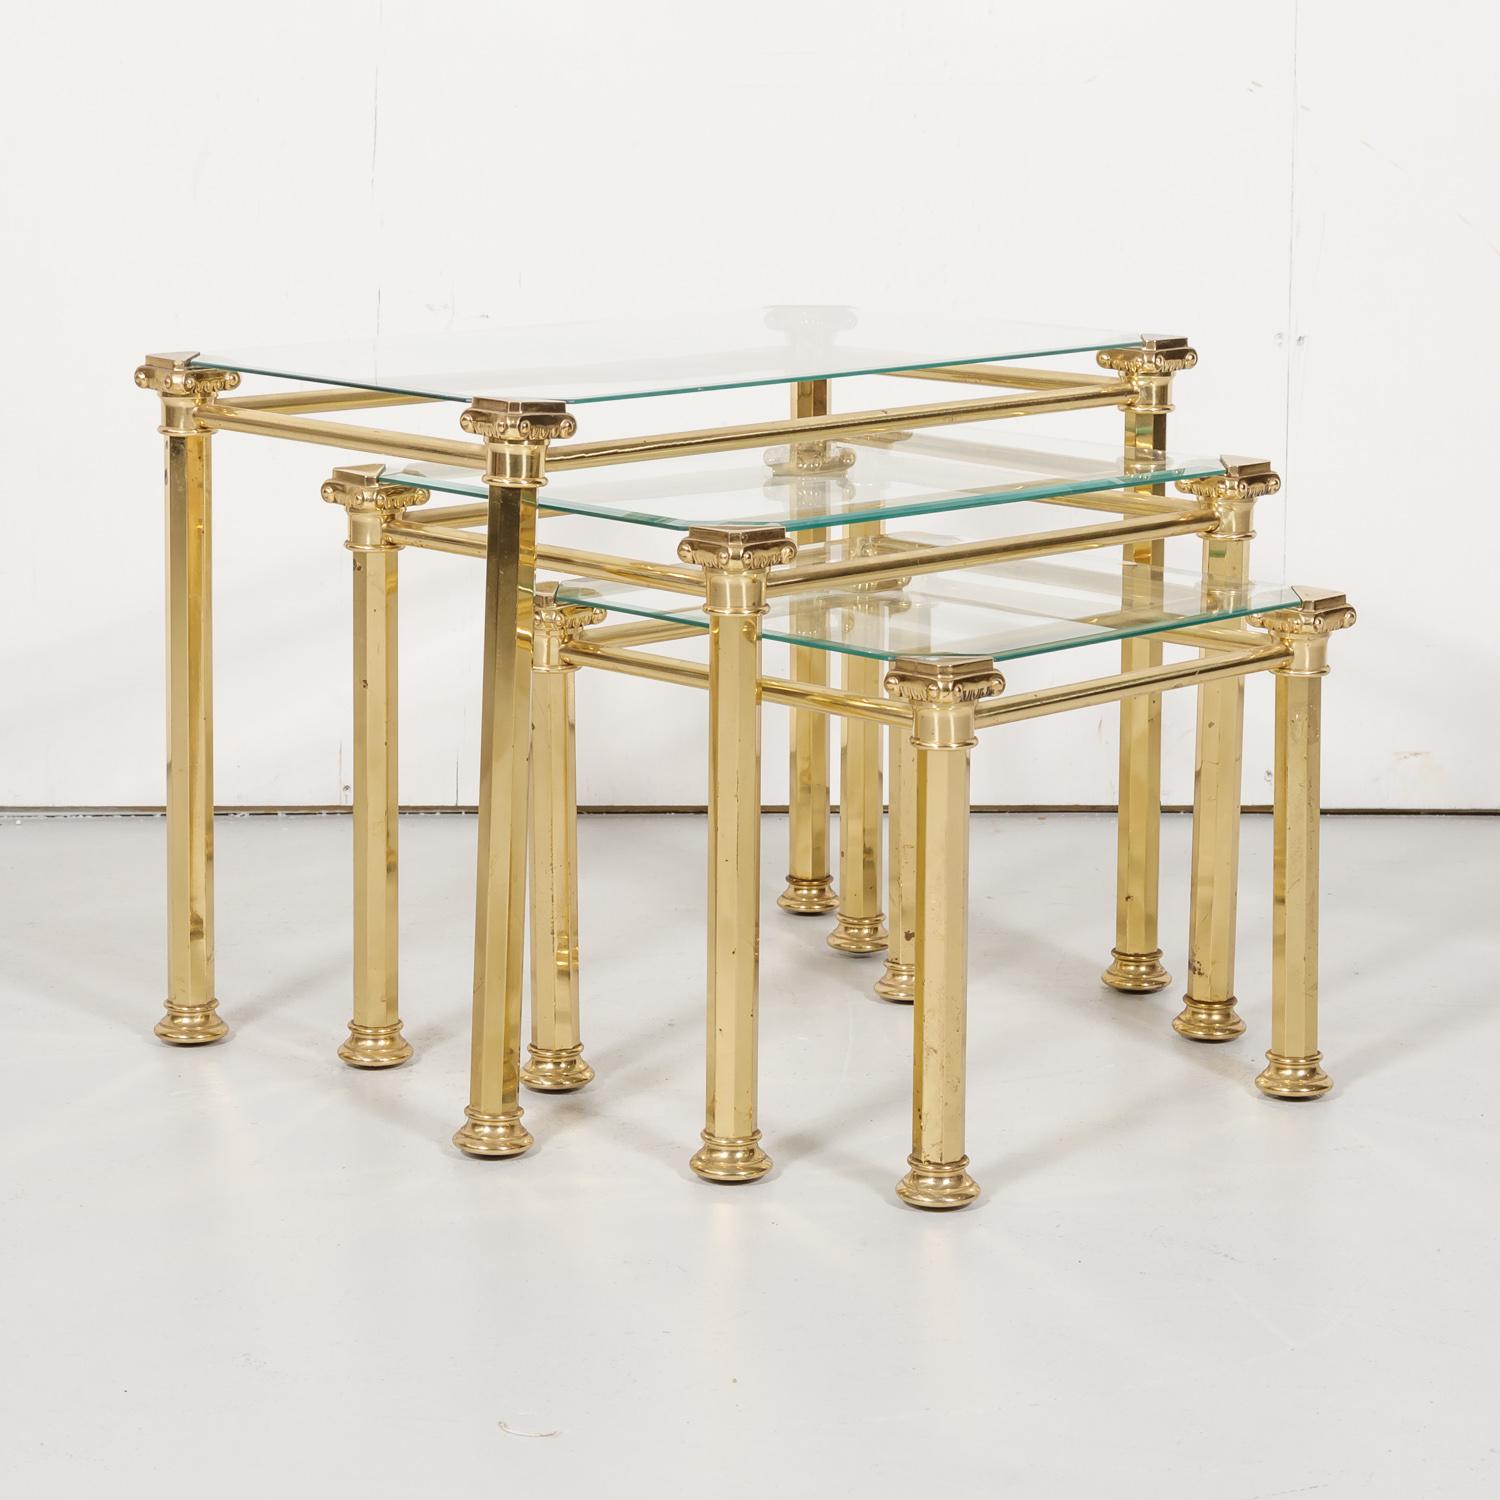 Very nice set of three midcentury French brass and glass nesting tables by prominent French design house Maison Baguès, having a brass capital at each corner with an inset glass top, circa 1950s. Raised on brass hexagonal legs that are joined by